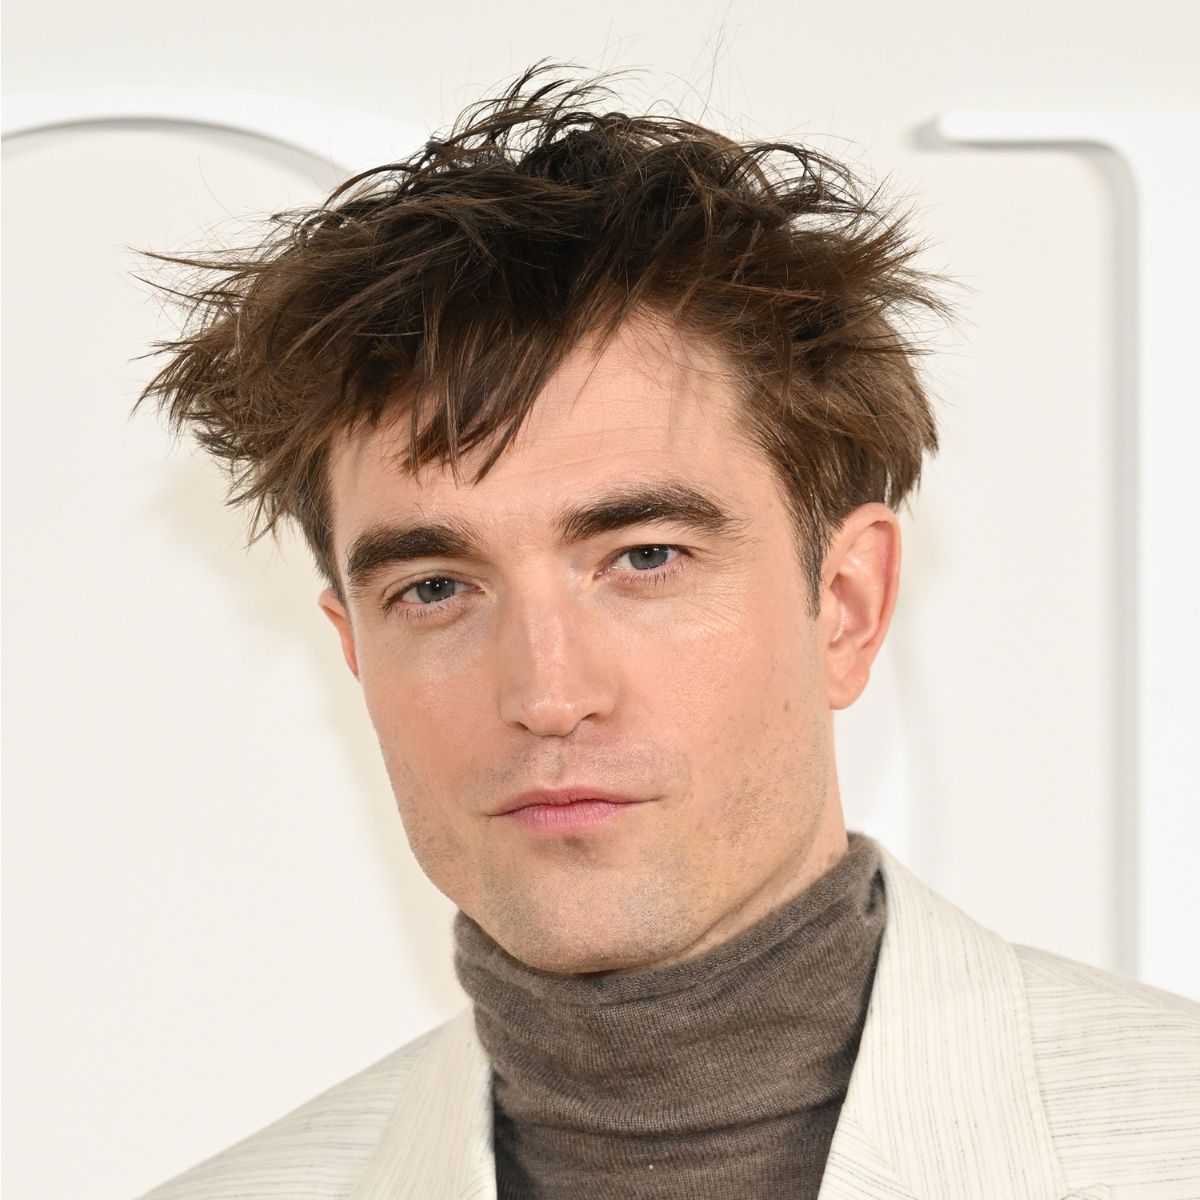 Robert Pattinson Wishes He Could Dress Like A$AP Rocky